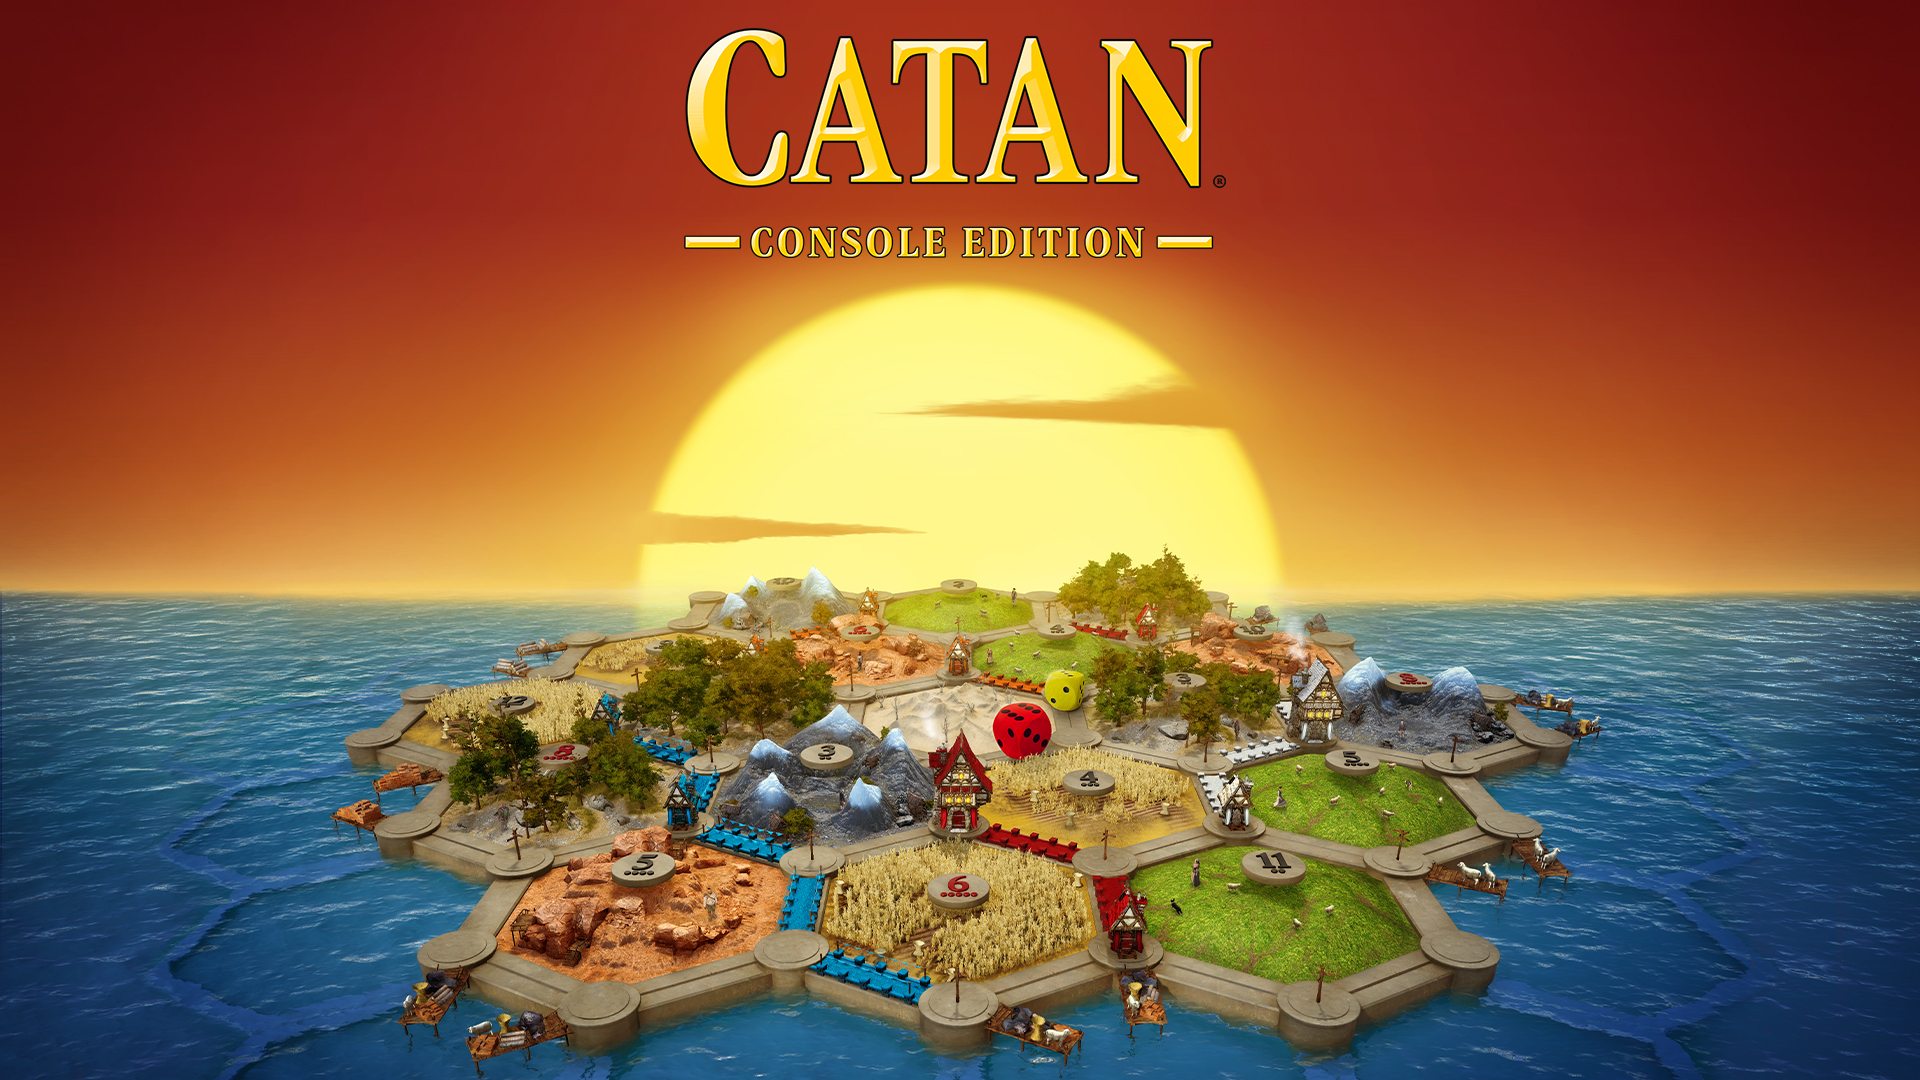 The key art for Catan – Console Edition. The sun rises over a gameboard made up of different hexes.